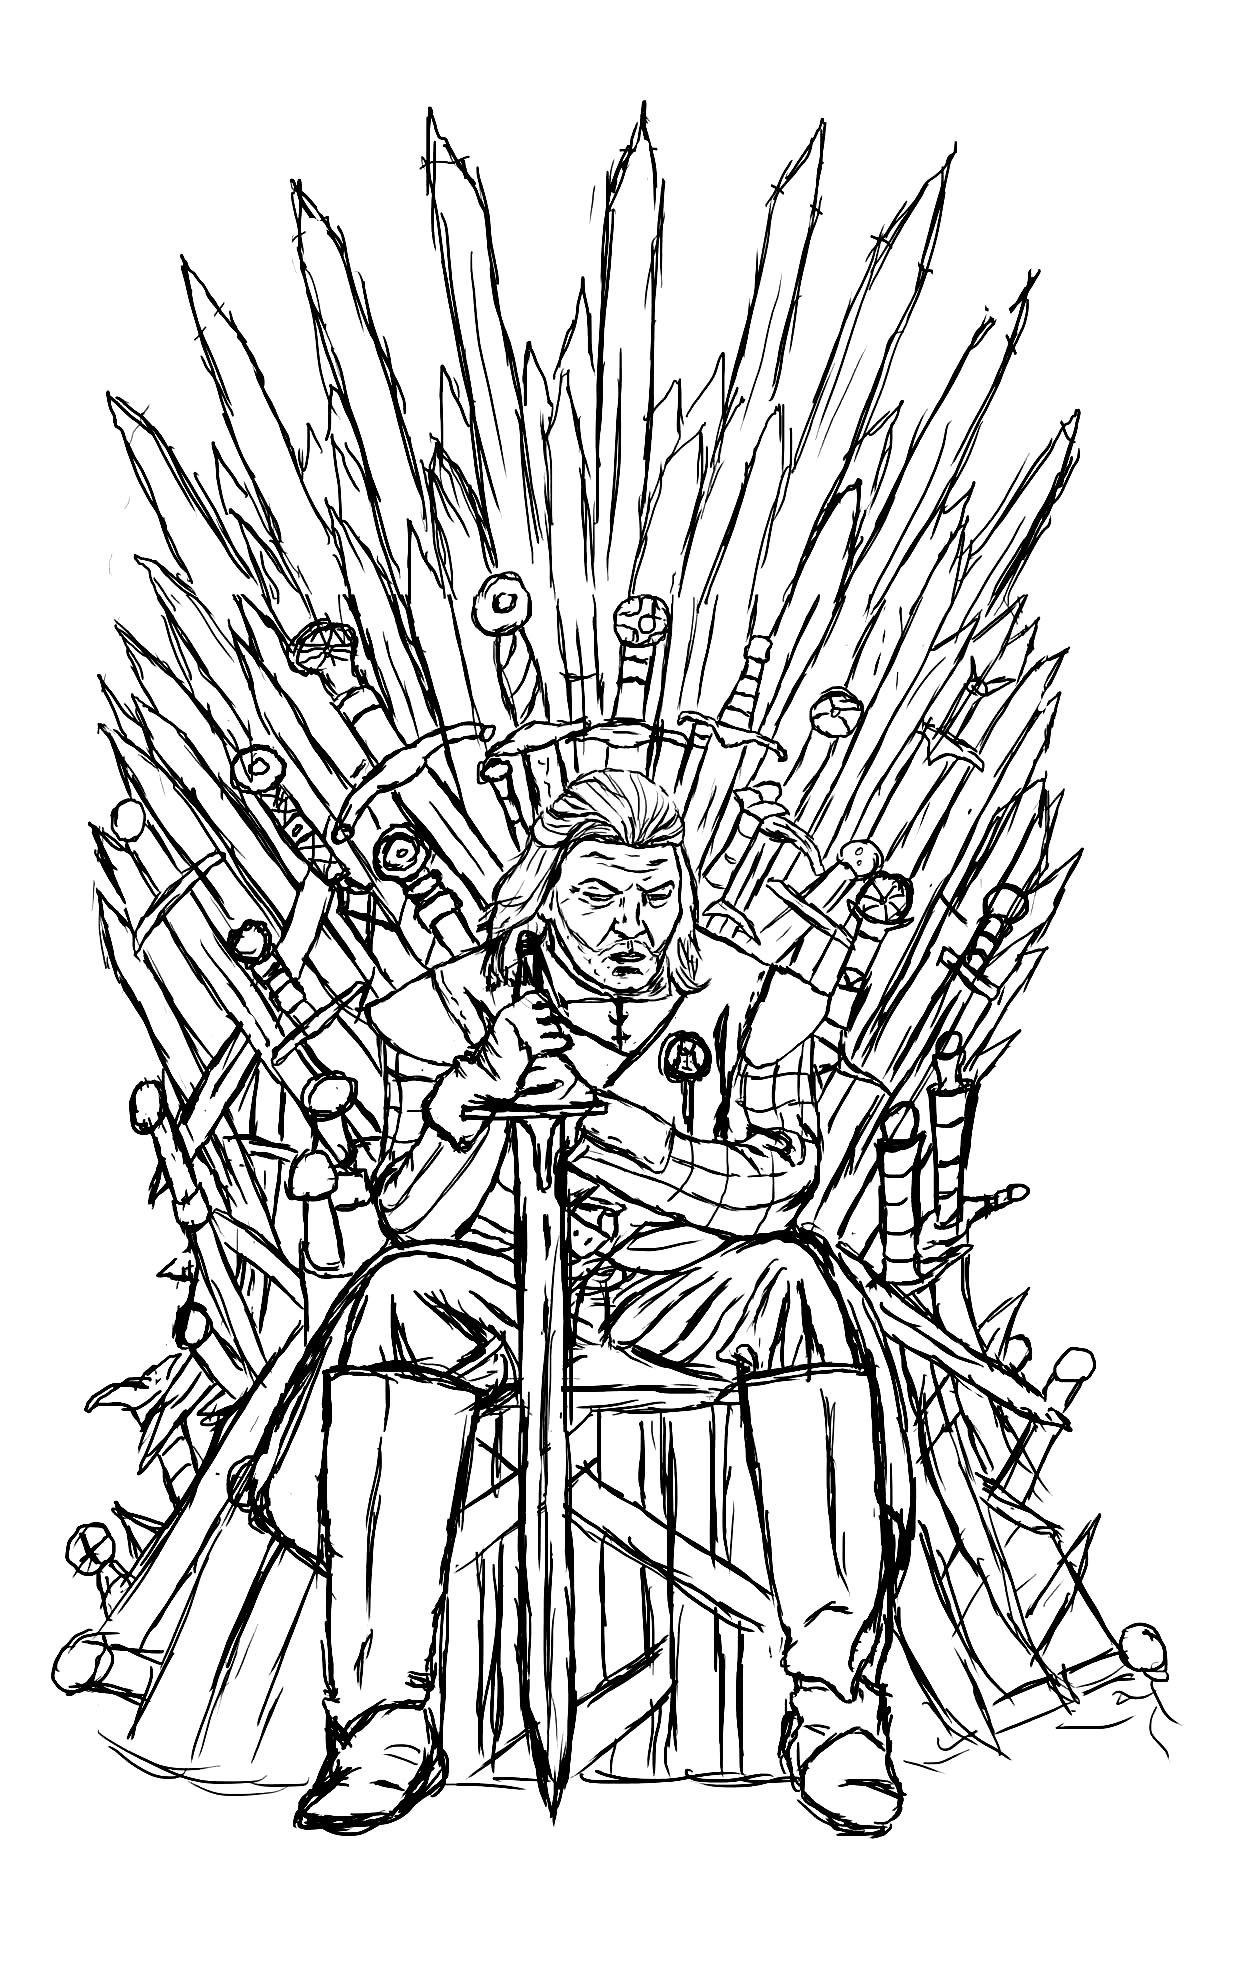 game of thrones coloring book pages colored - photo #40